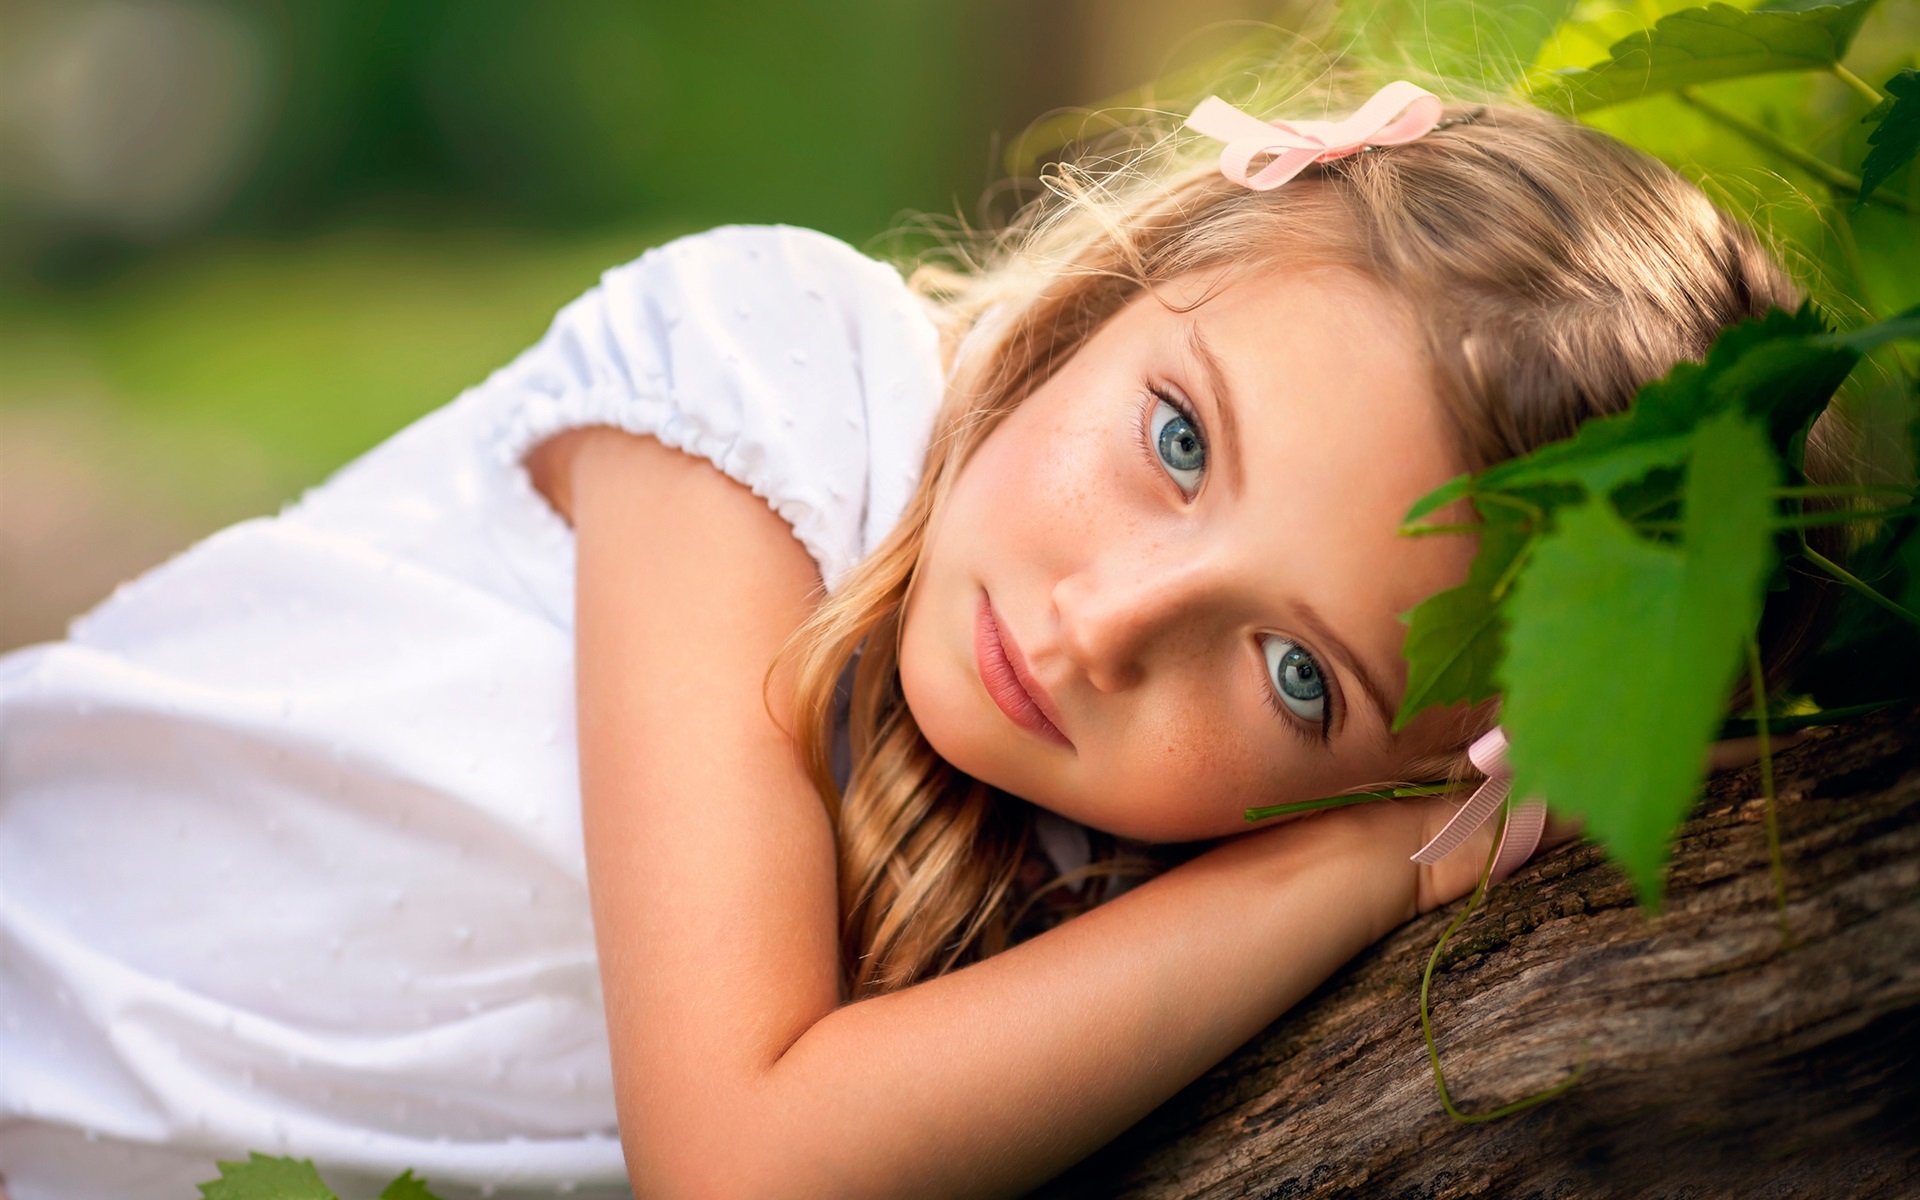 1. Adorable Blonde Hair Toddler Girl Poses for Photoshoot - wide 7